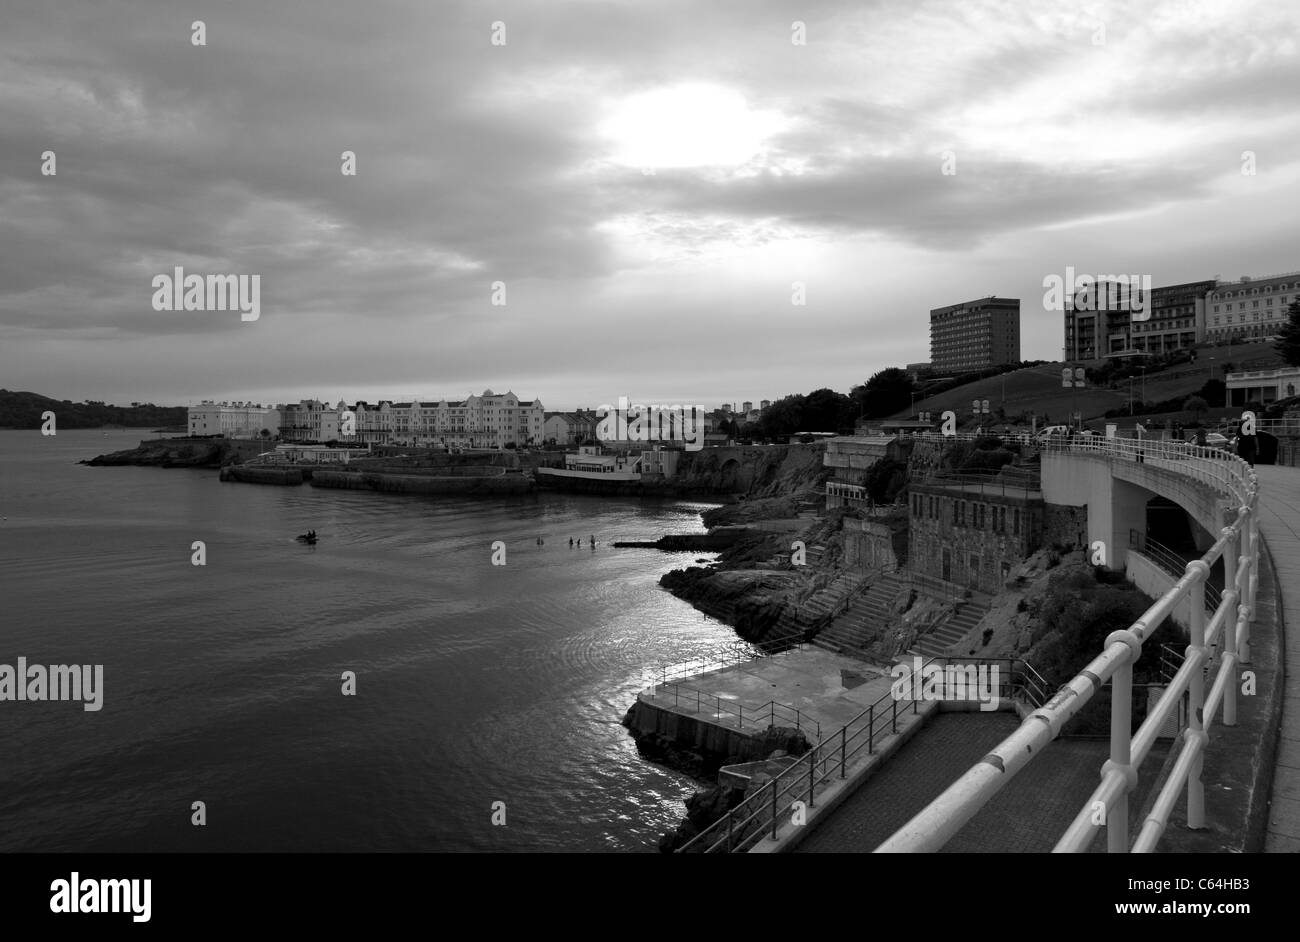 Plymouth Hoe and seafront promenade  overlooking Plymouth Sound at sunset - in black and white. Stock Photo